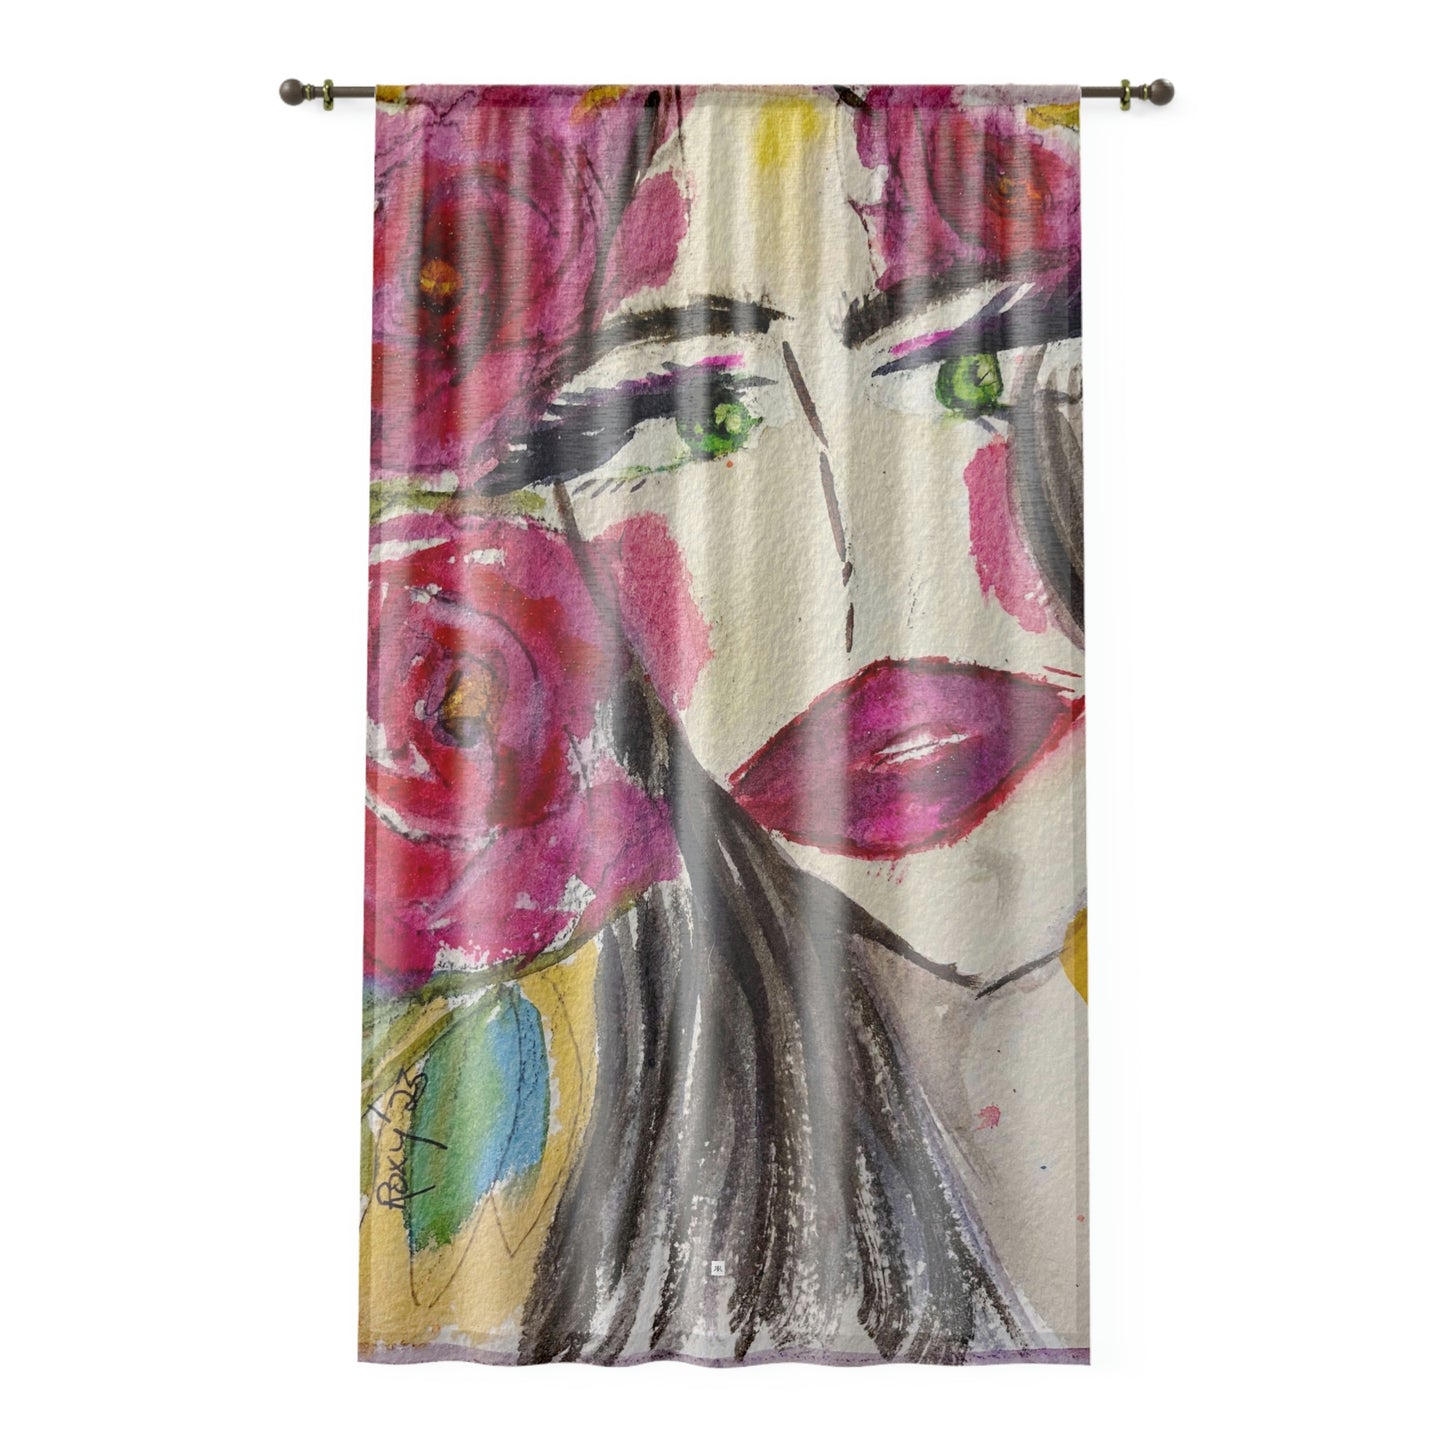 Pretty Interested Brunette with Big Lips "Uh-huh" 84 x 50 inch Sheer Window Curtain